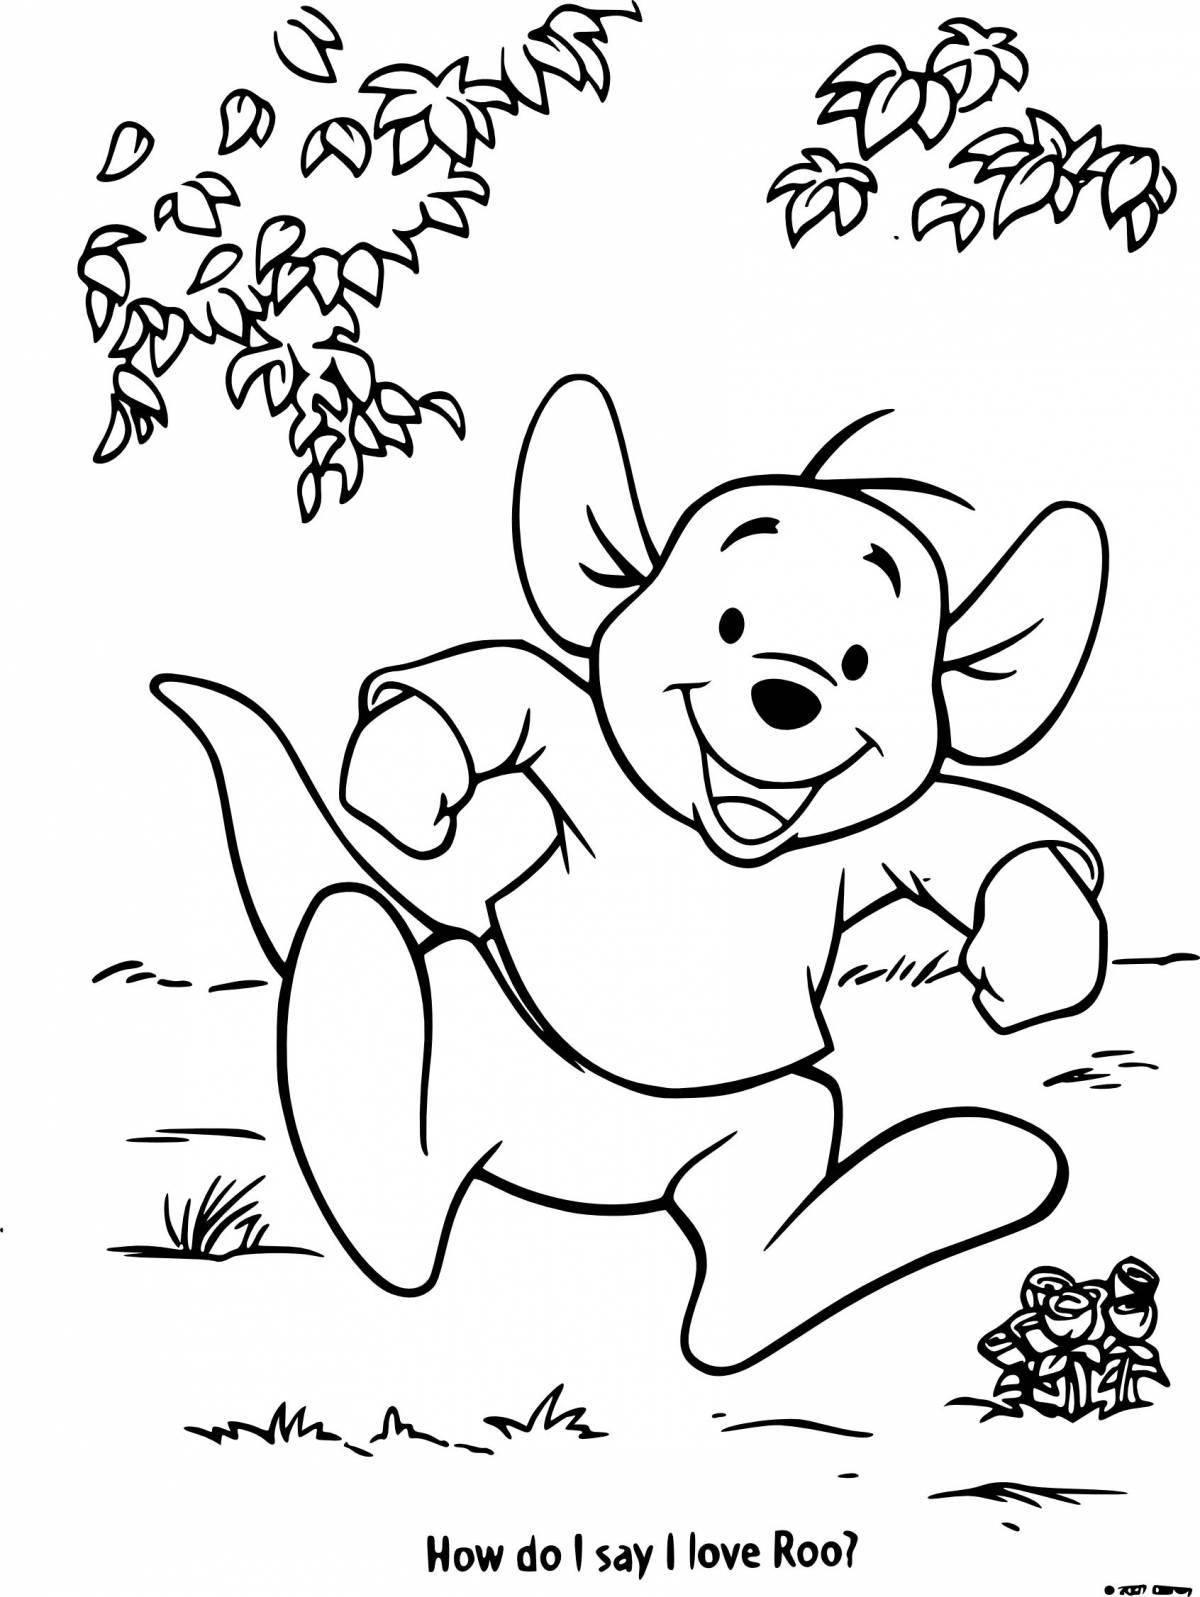 The charm of the whole coloring page en